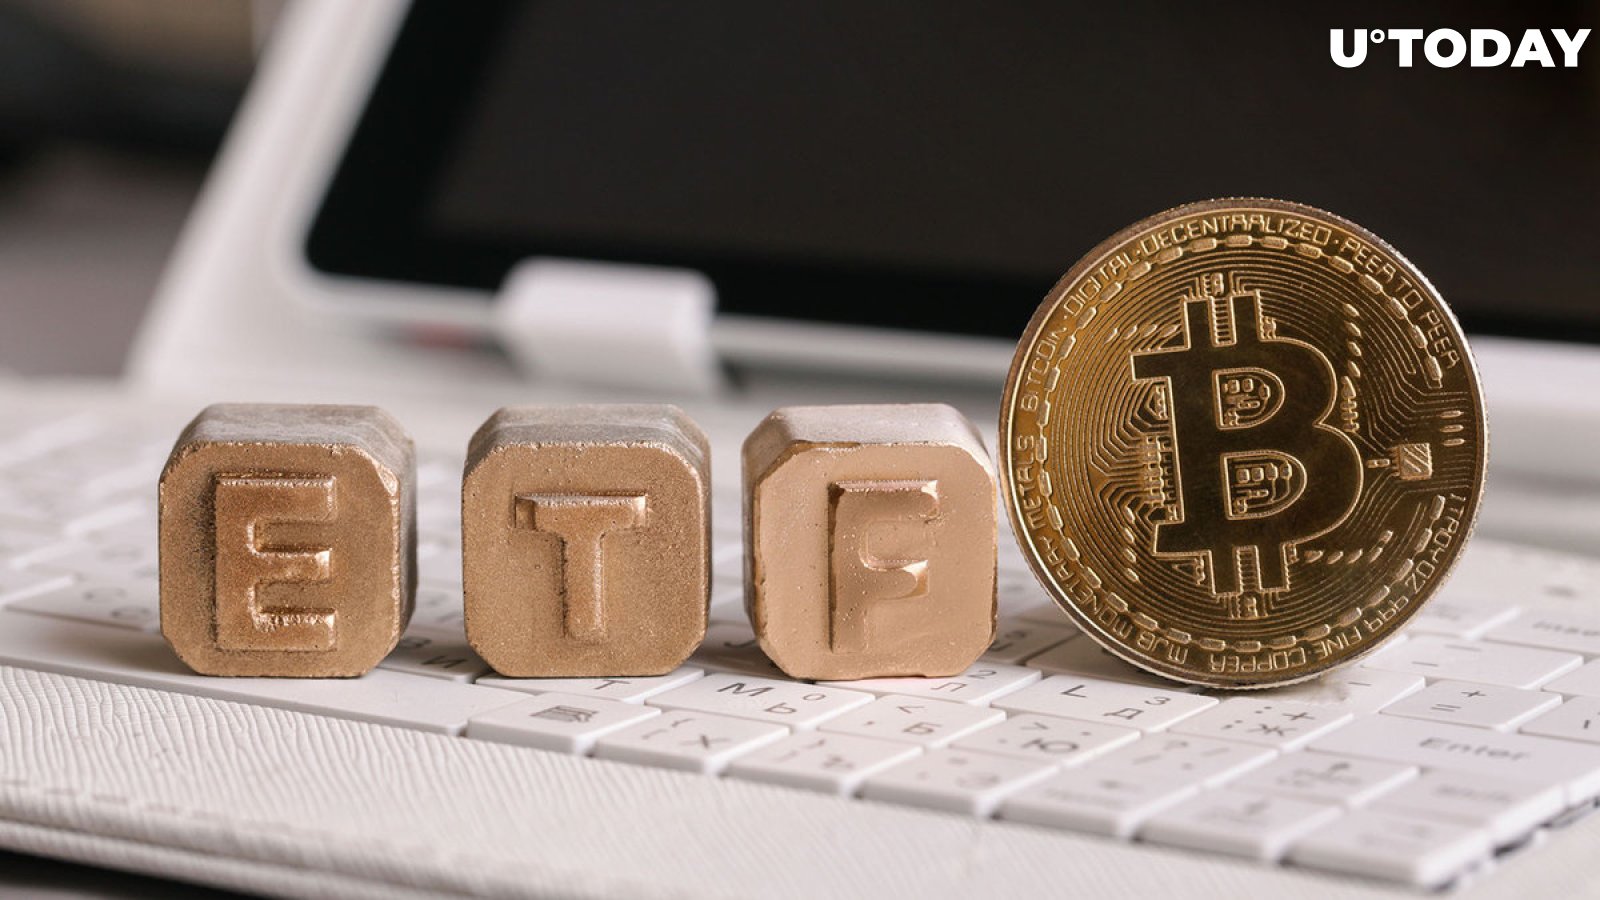 Bitcoin ETF Update: Bitwise Files Amended Application